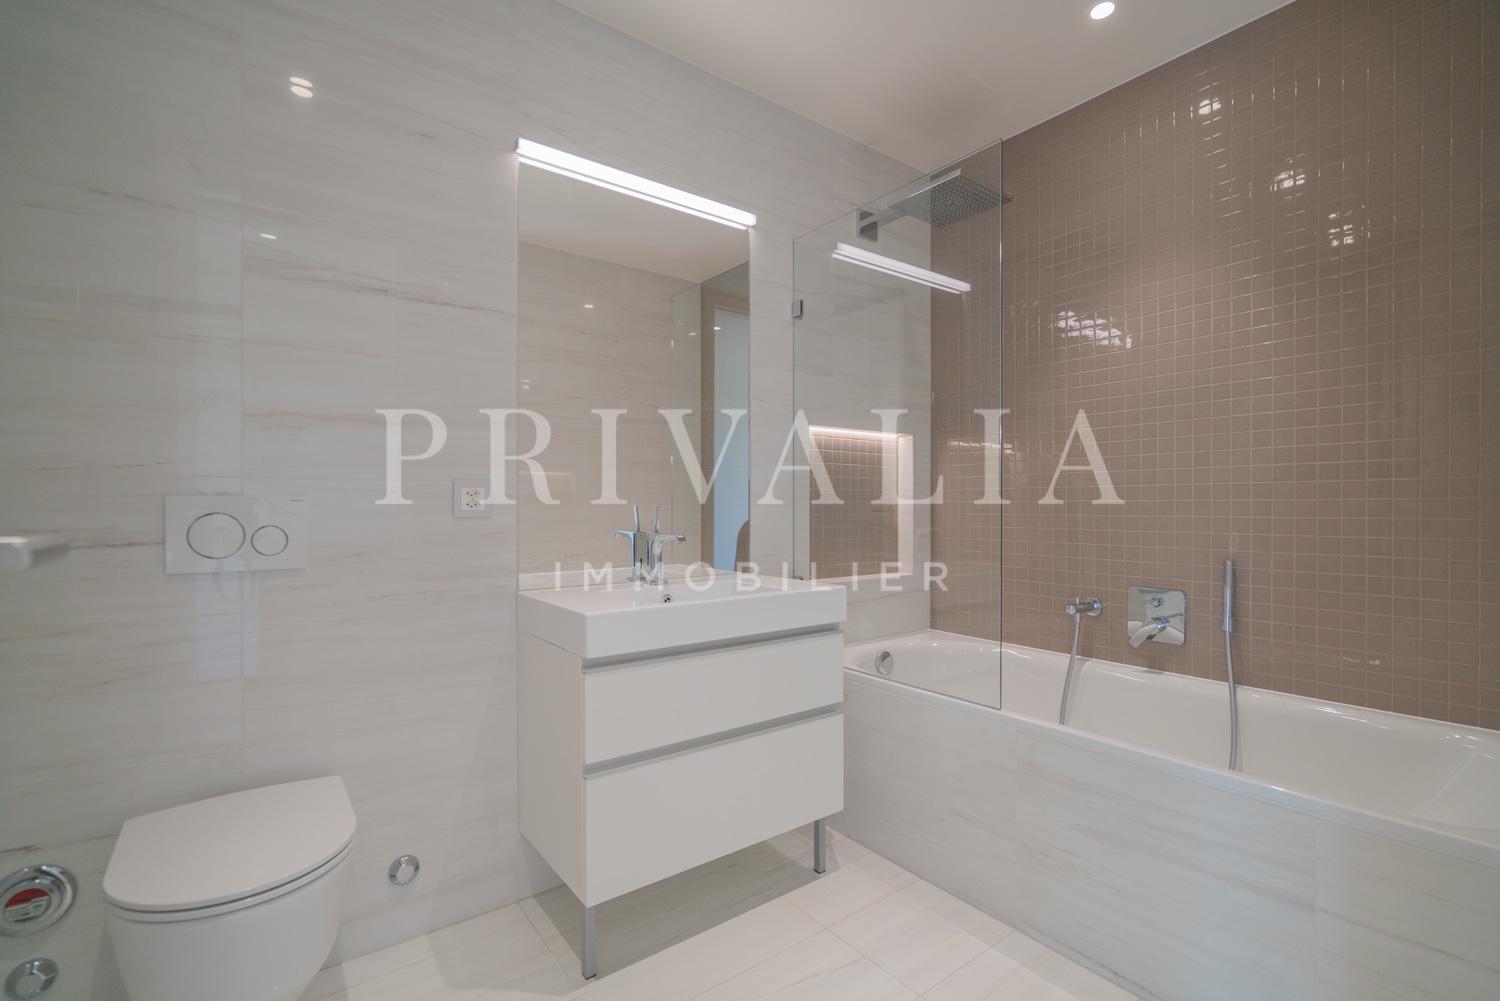 Privalia5-room flat in a new high-end residence